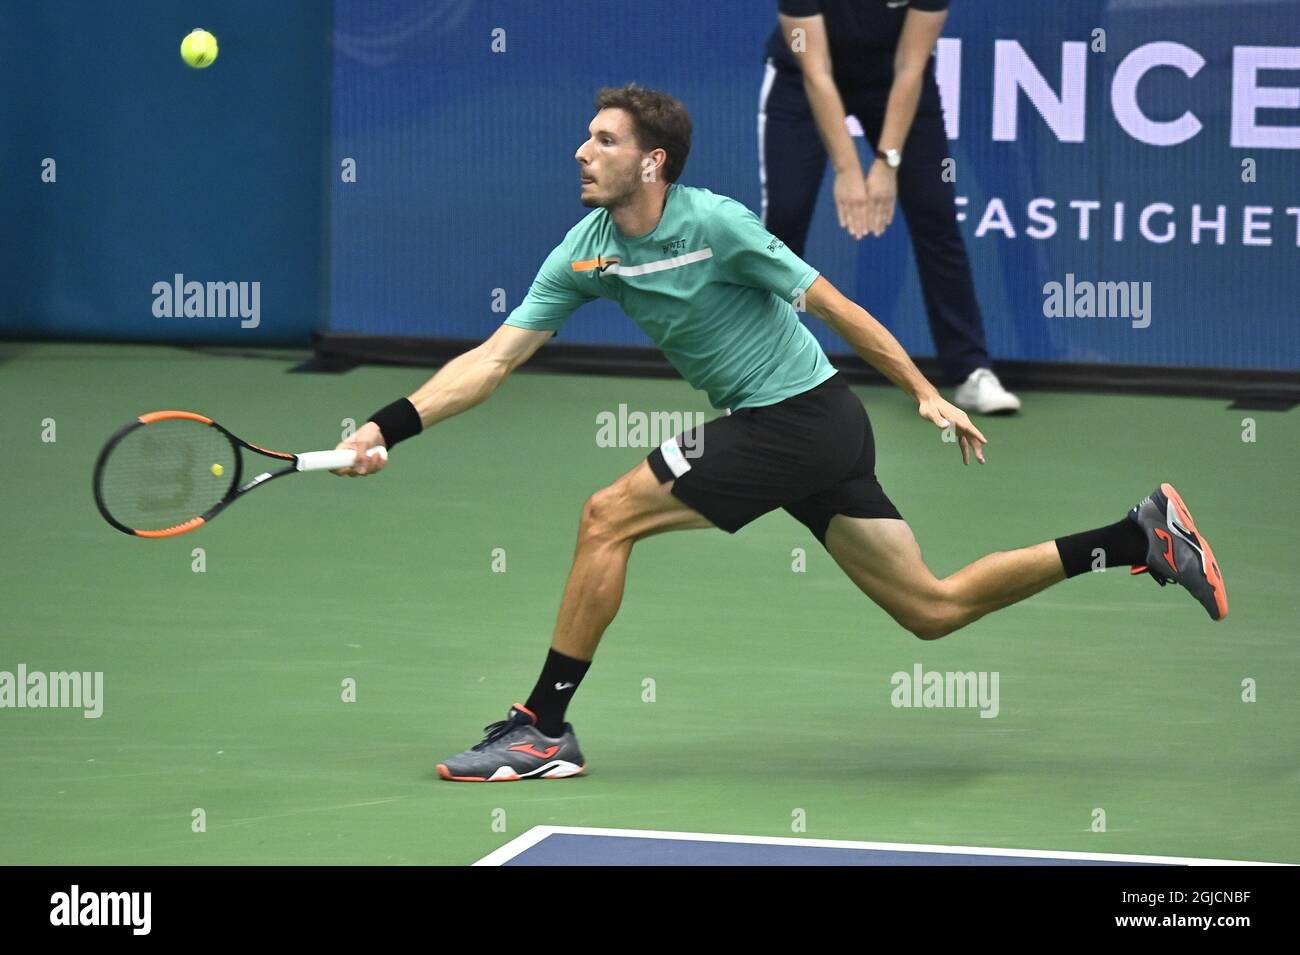 Pablo Carreno Busta (ESP) during the men's single semi finals at the ATP Stockholm Open tennis tournament at the Royal Tennis Hall in Stockholm, Sweden, October 19 2018, Photo: Claudio Bresciani / TT code 10090  Stock Photo